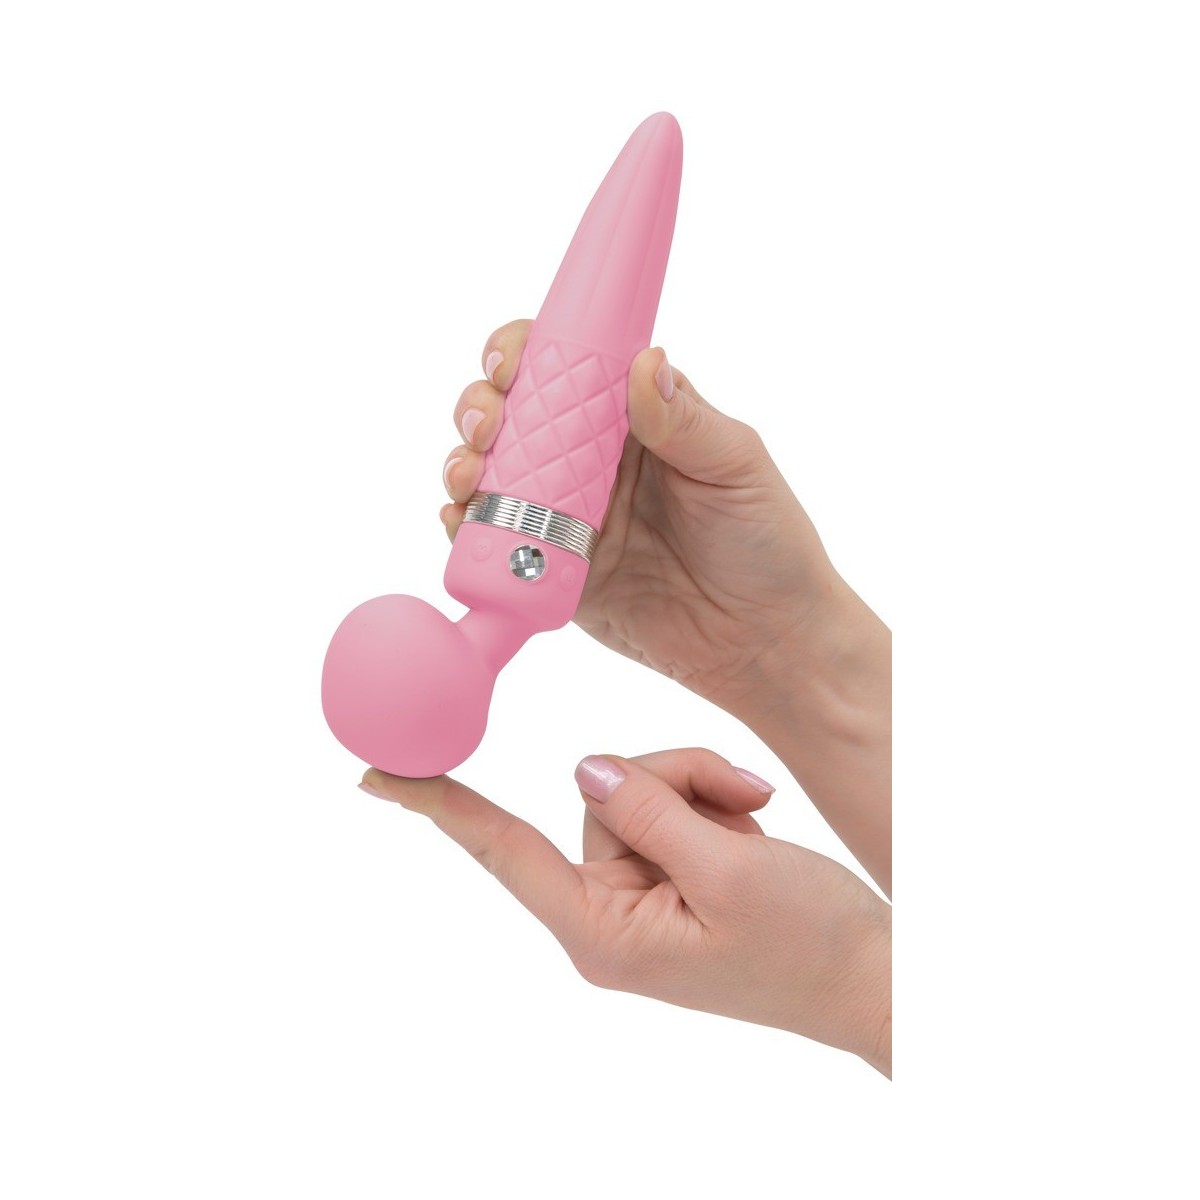 Vibratore wand Pillow Talk Sultry rosa